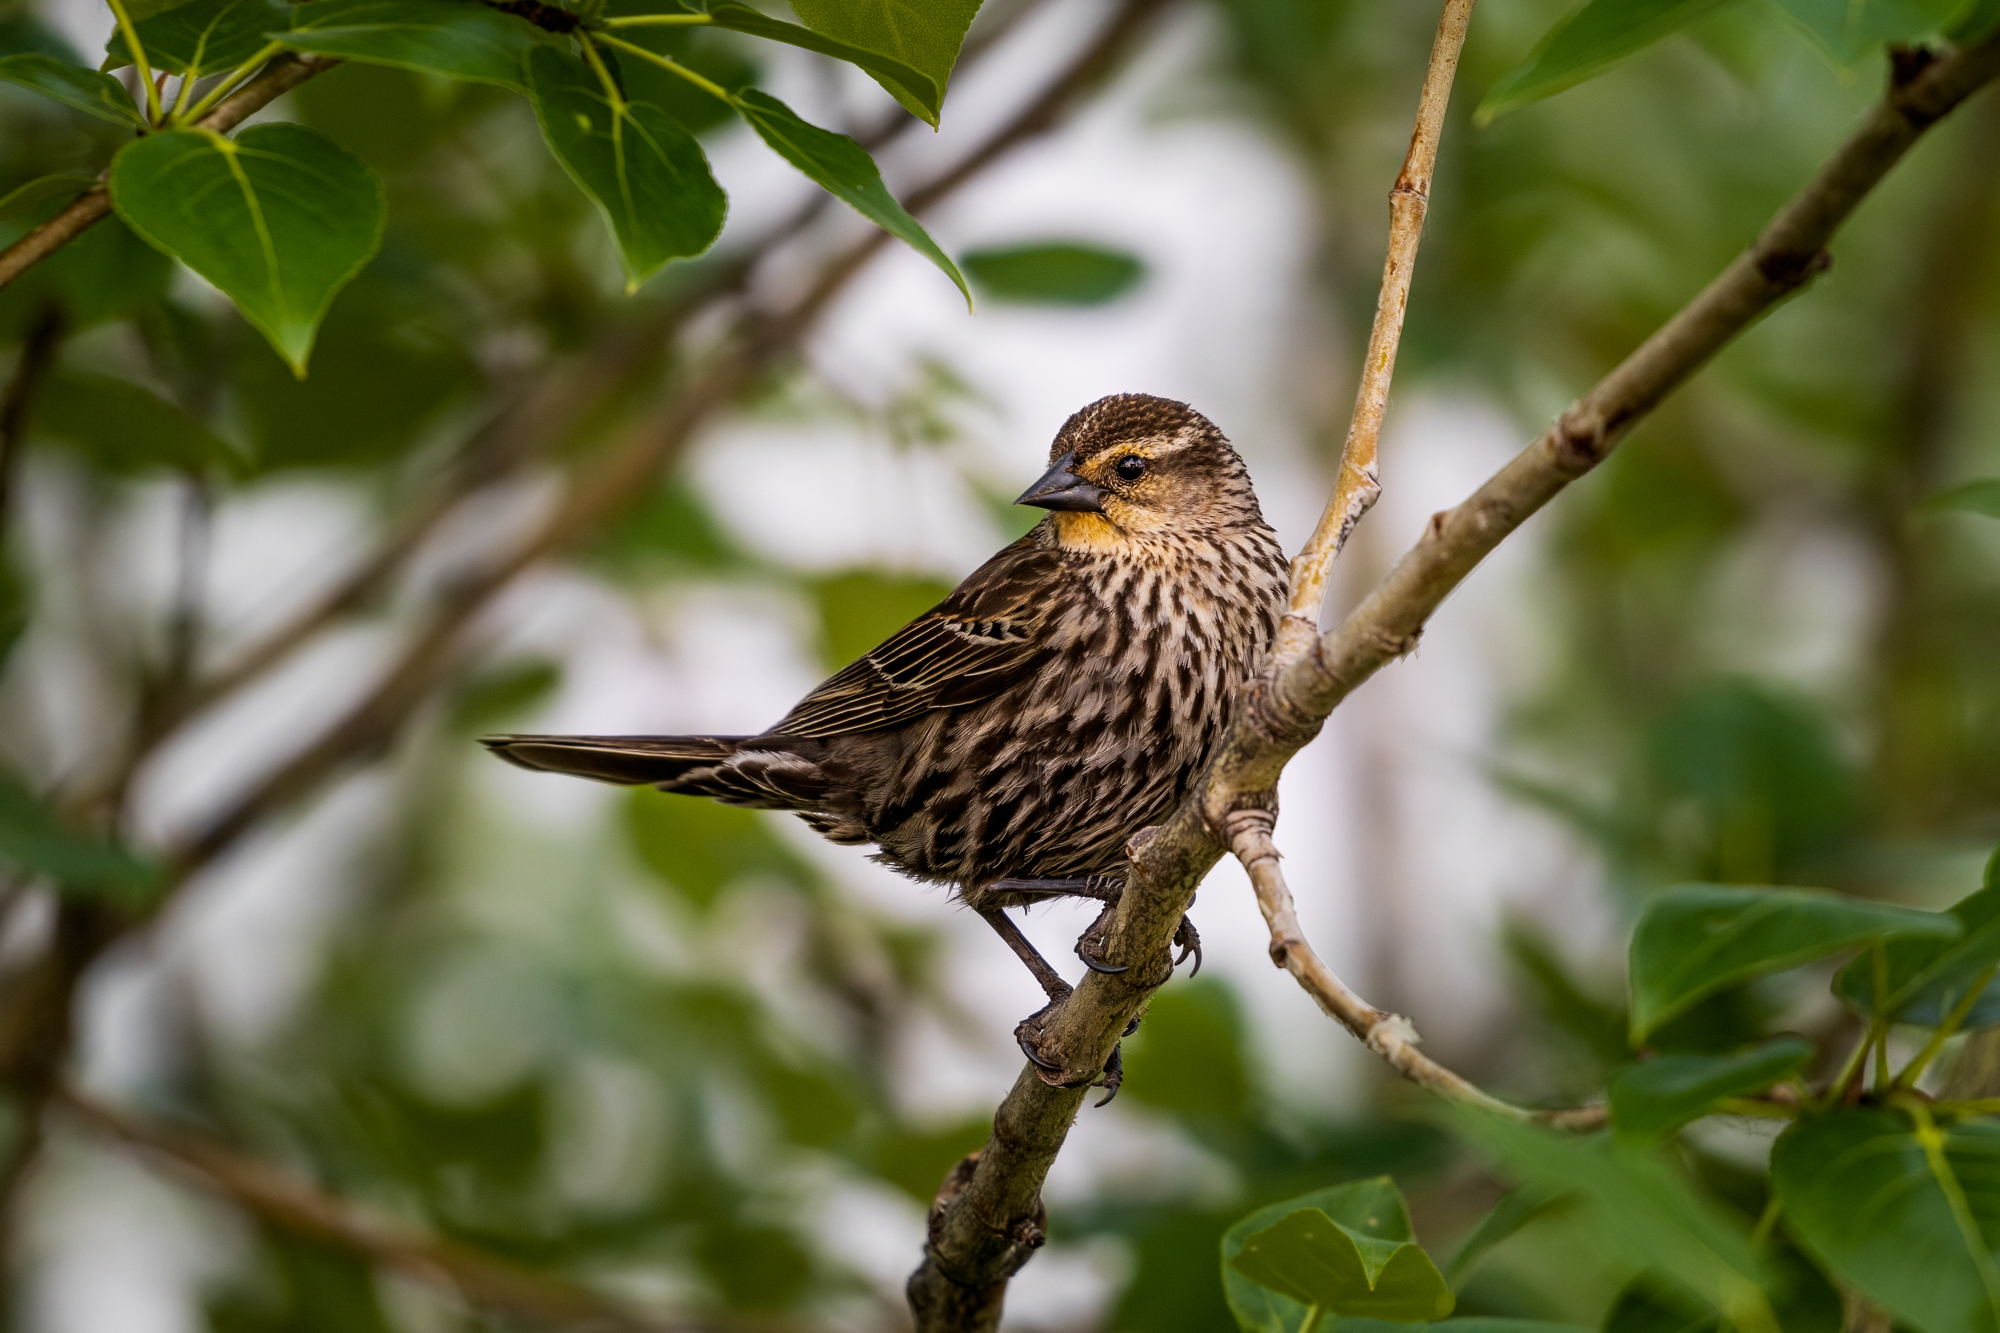 Female Red-winged Blackbird sitting on a branch in a tree